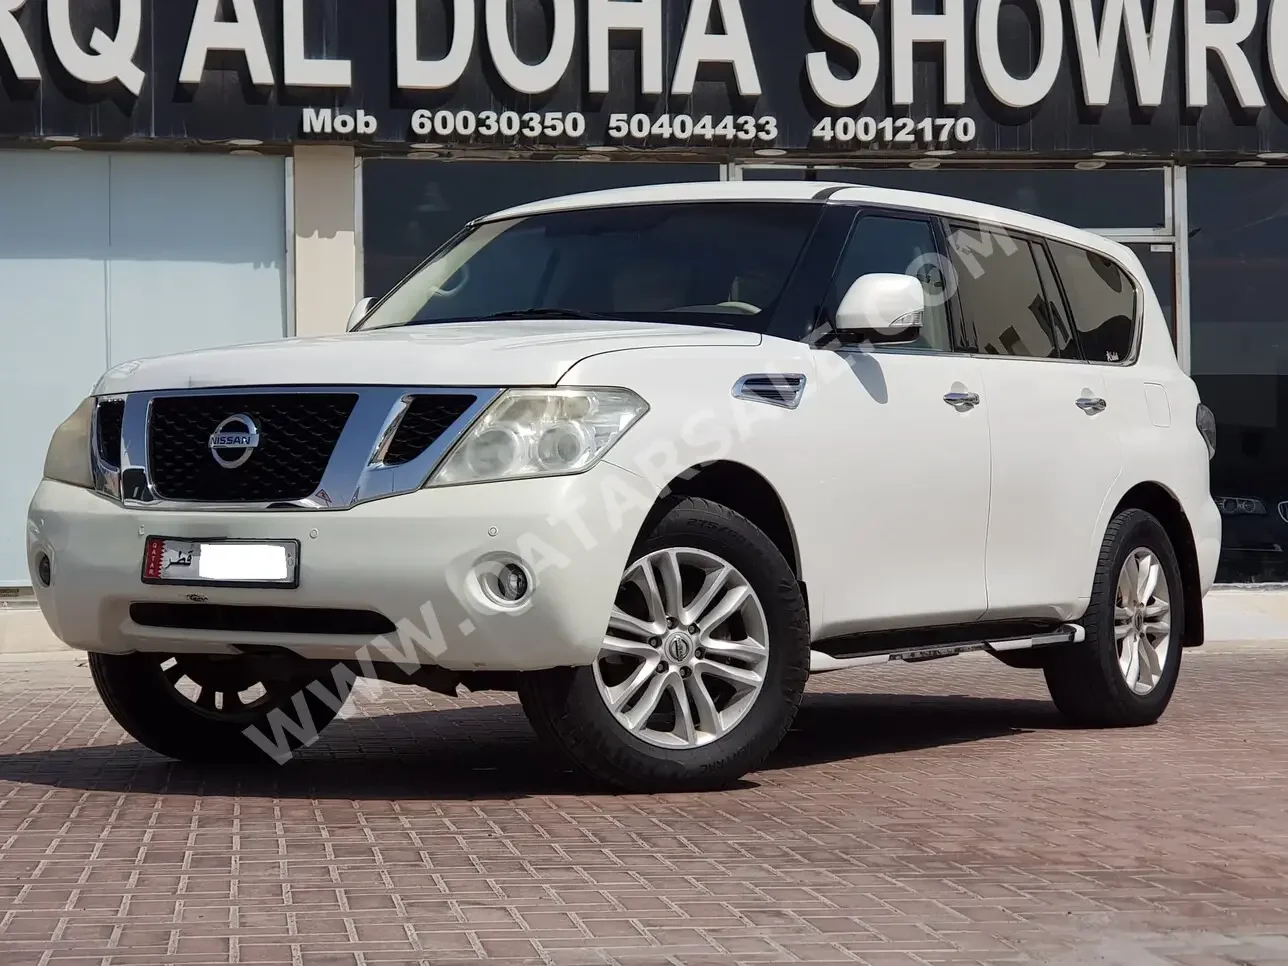 Nissan  Patrol  LE  2012  Automatic  210,000 Km  8 Cylinder  Four Wheel Drive (4WD)  SUV  White